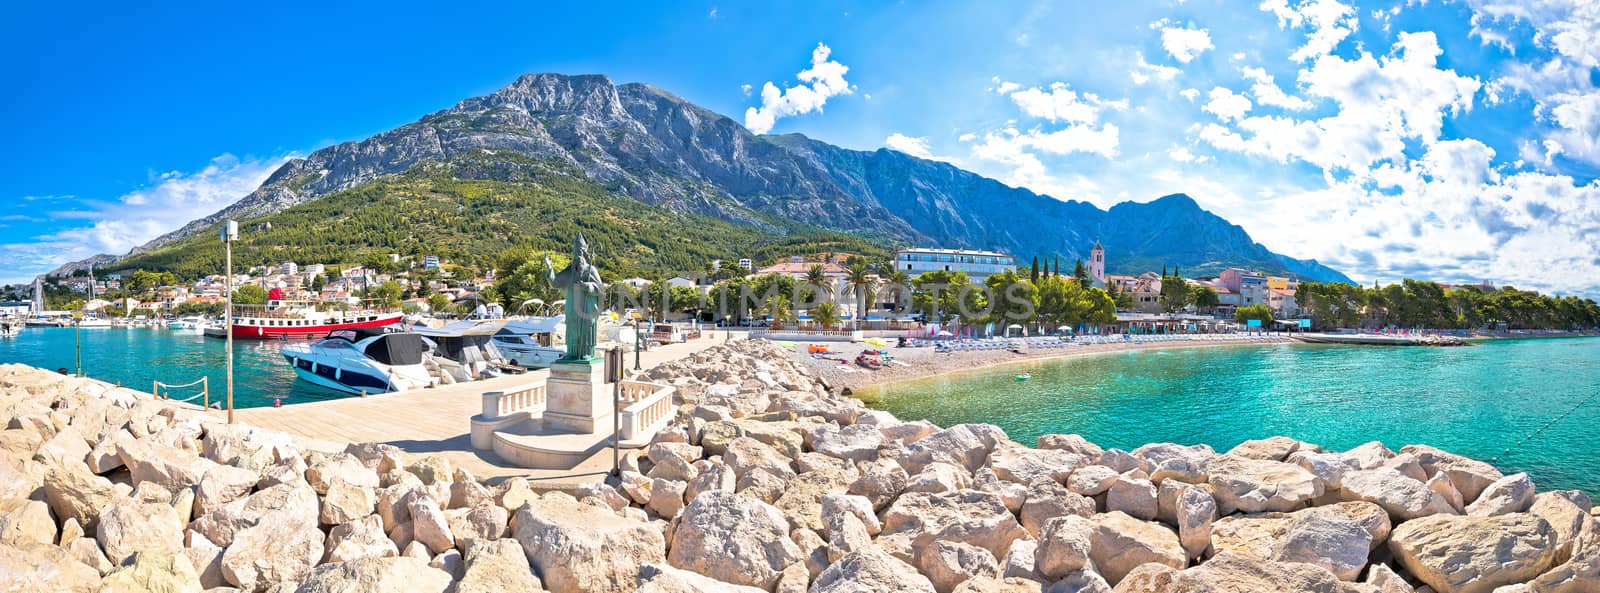 Town of Baska Voda beach and waterfront panoramic view by xbrchx